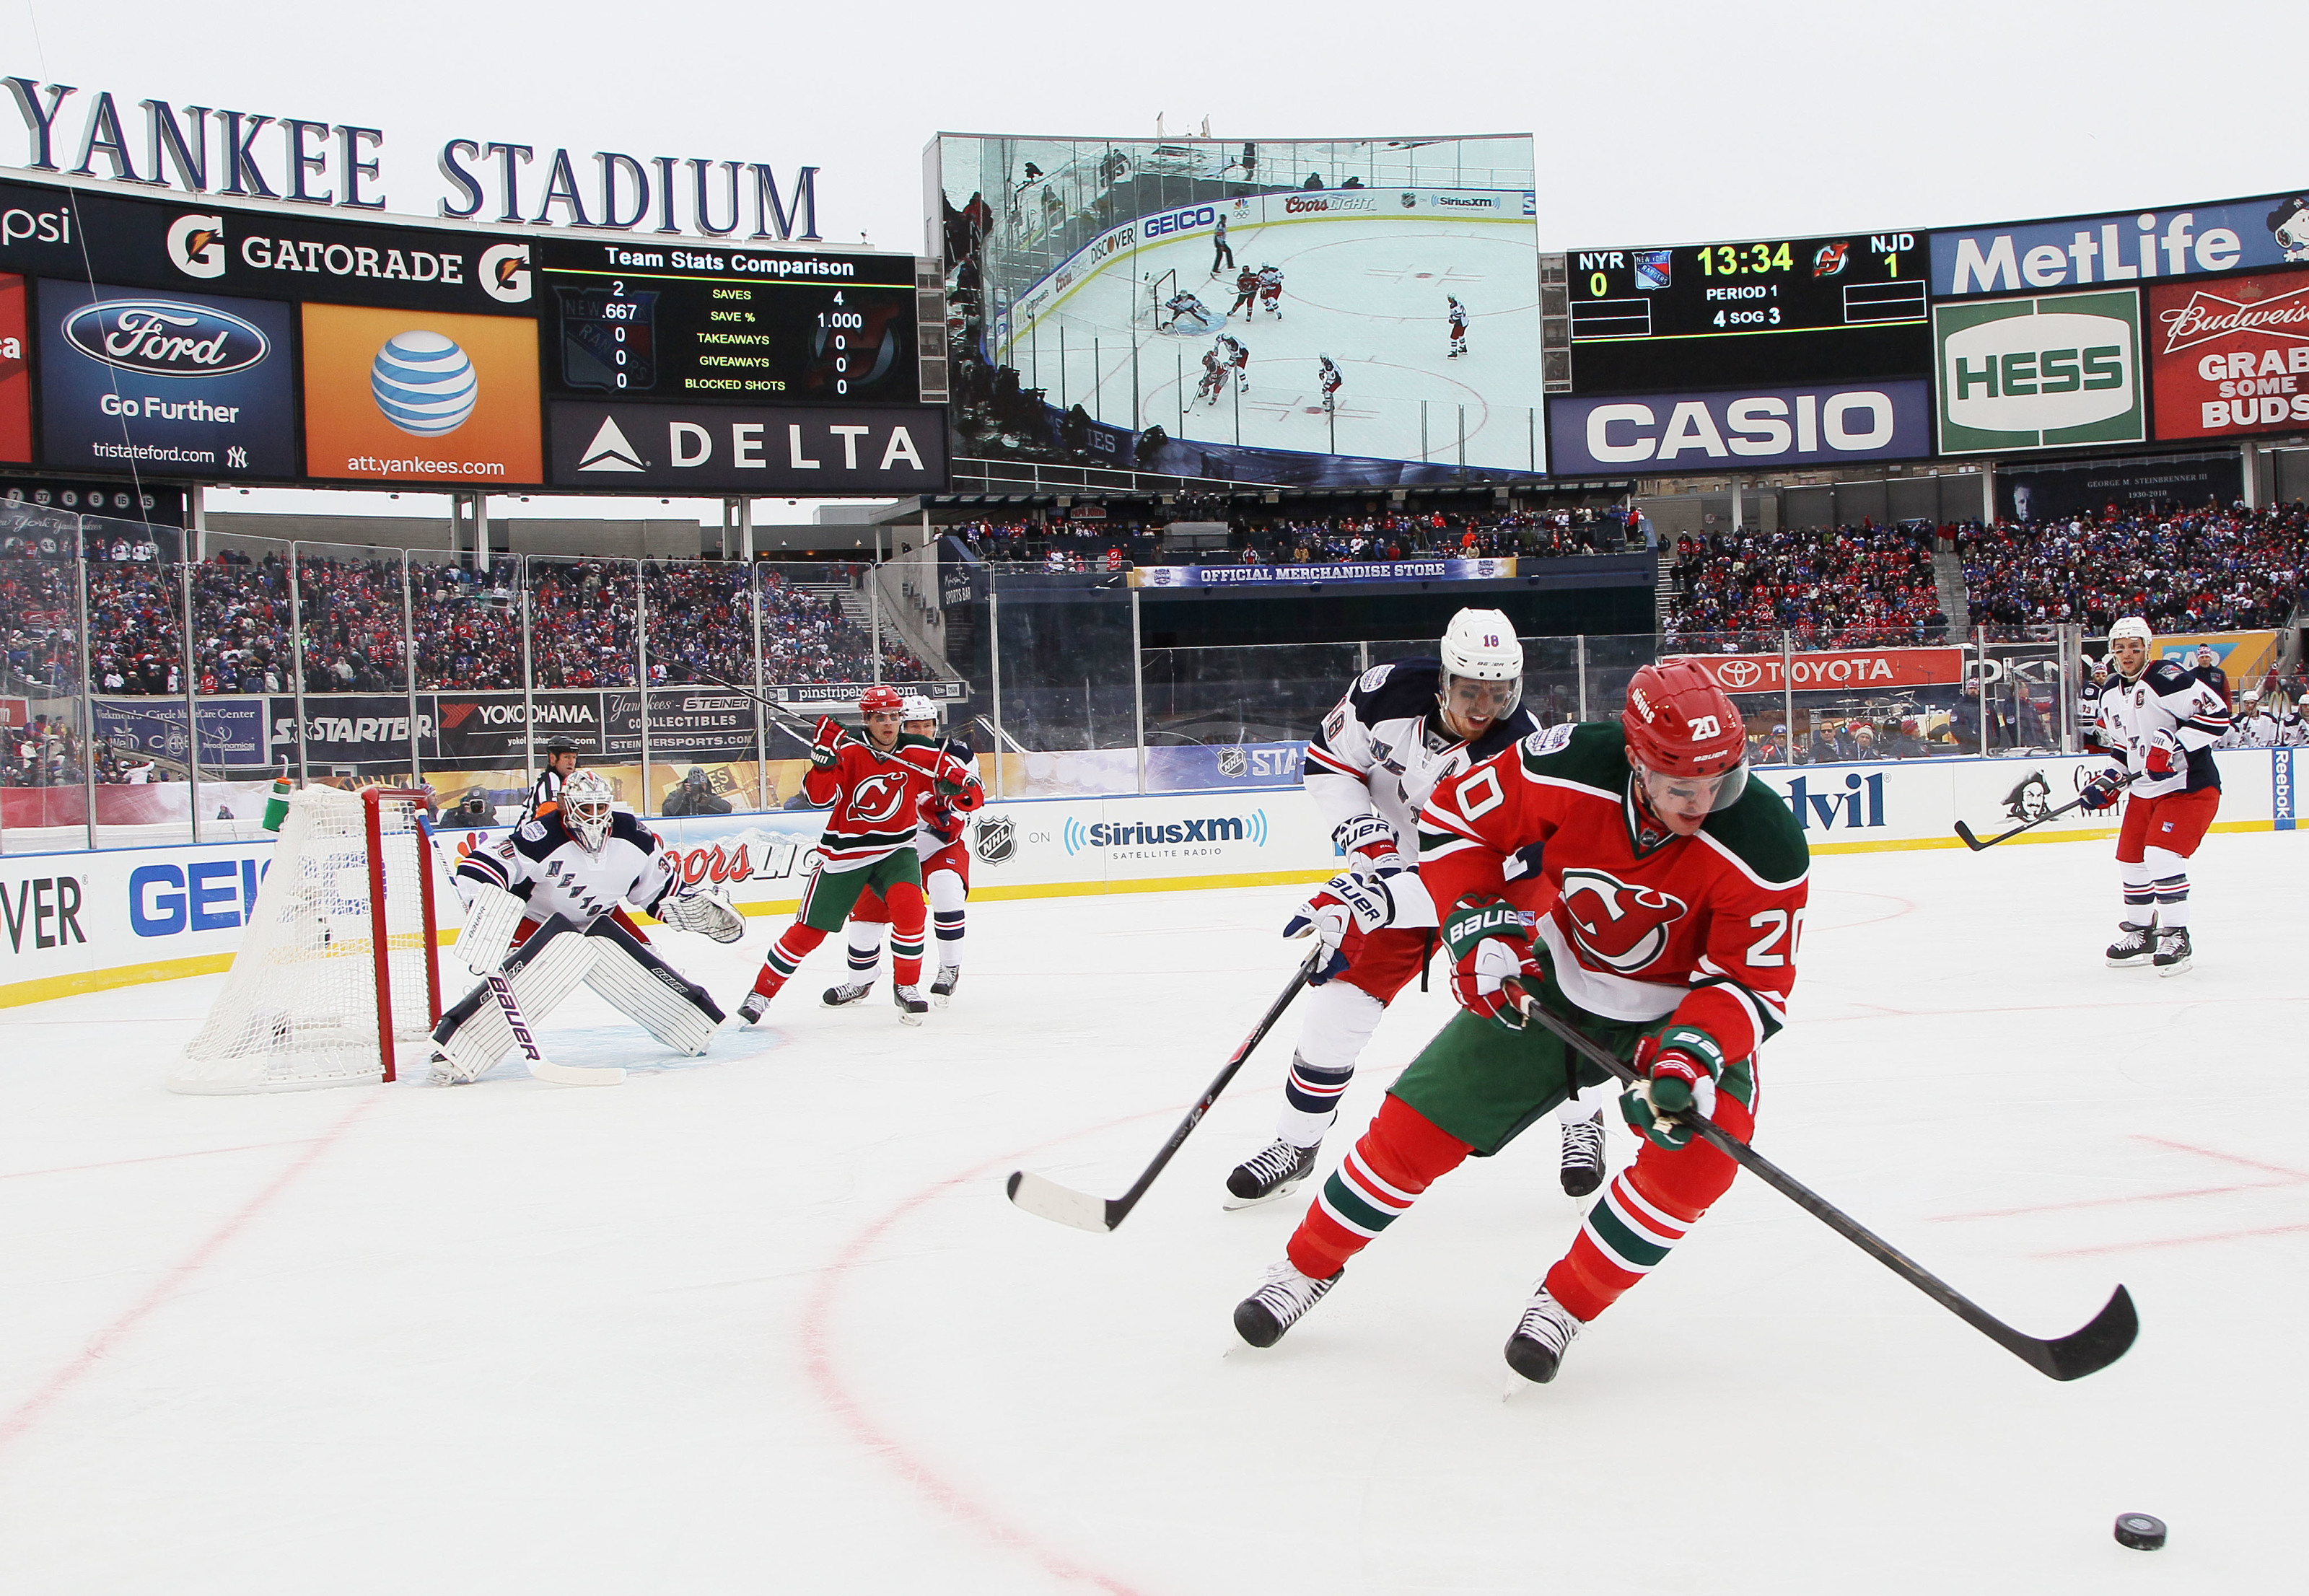 The NHL's outdoor game had three winners: the Canes, hockey and